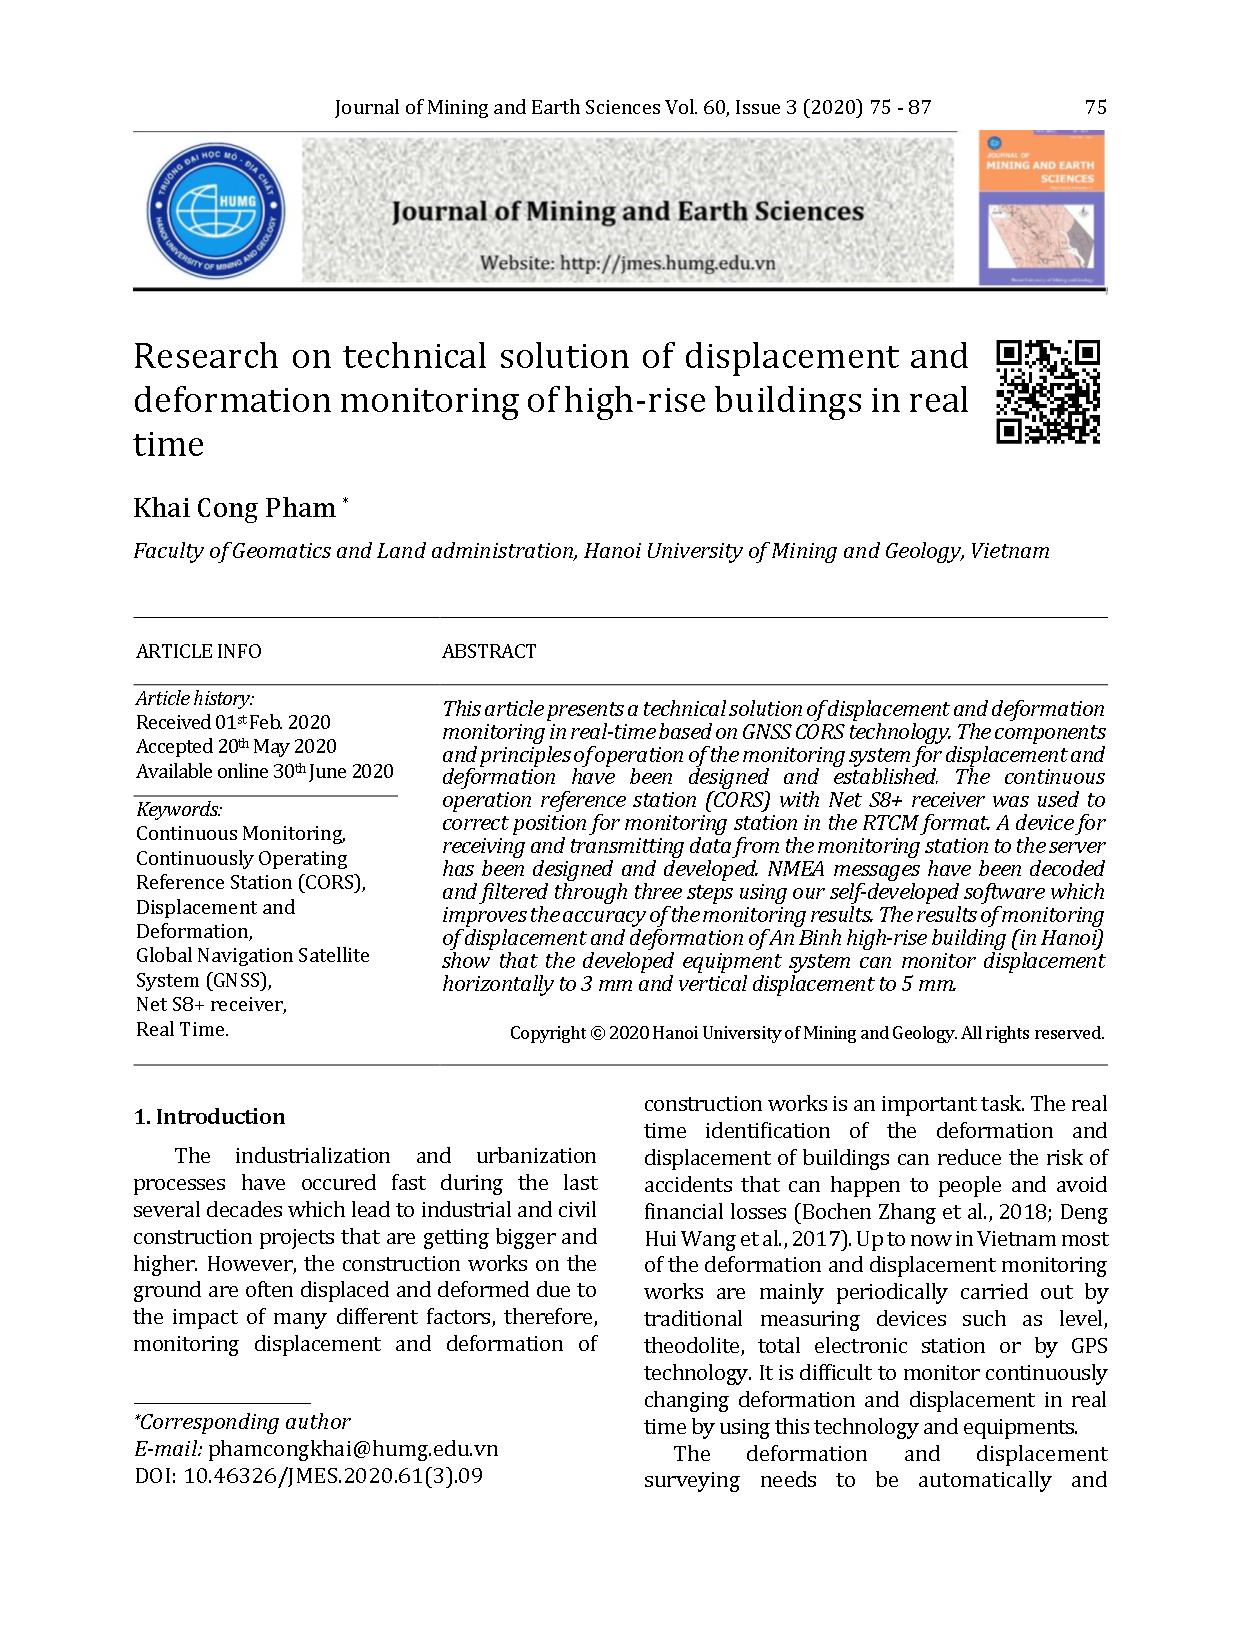 Research on technical solution of displacement and deformation monitoring of high-Rise buildings in real time trang 1